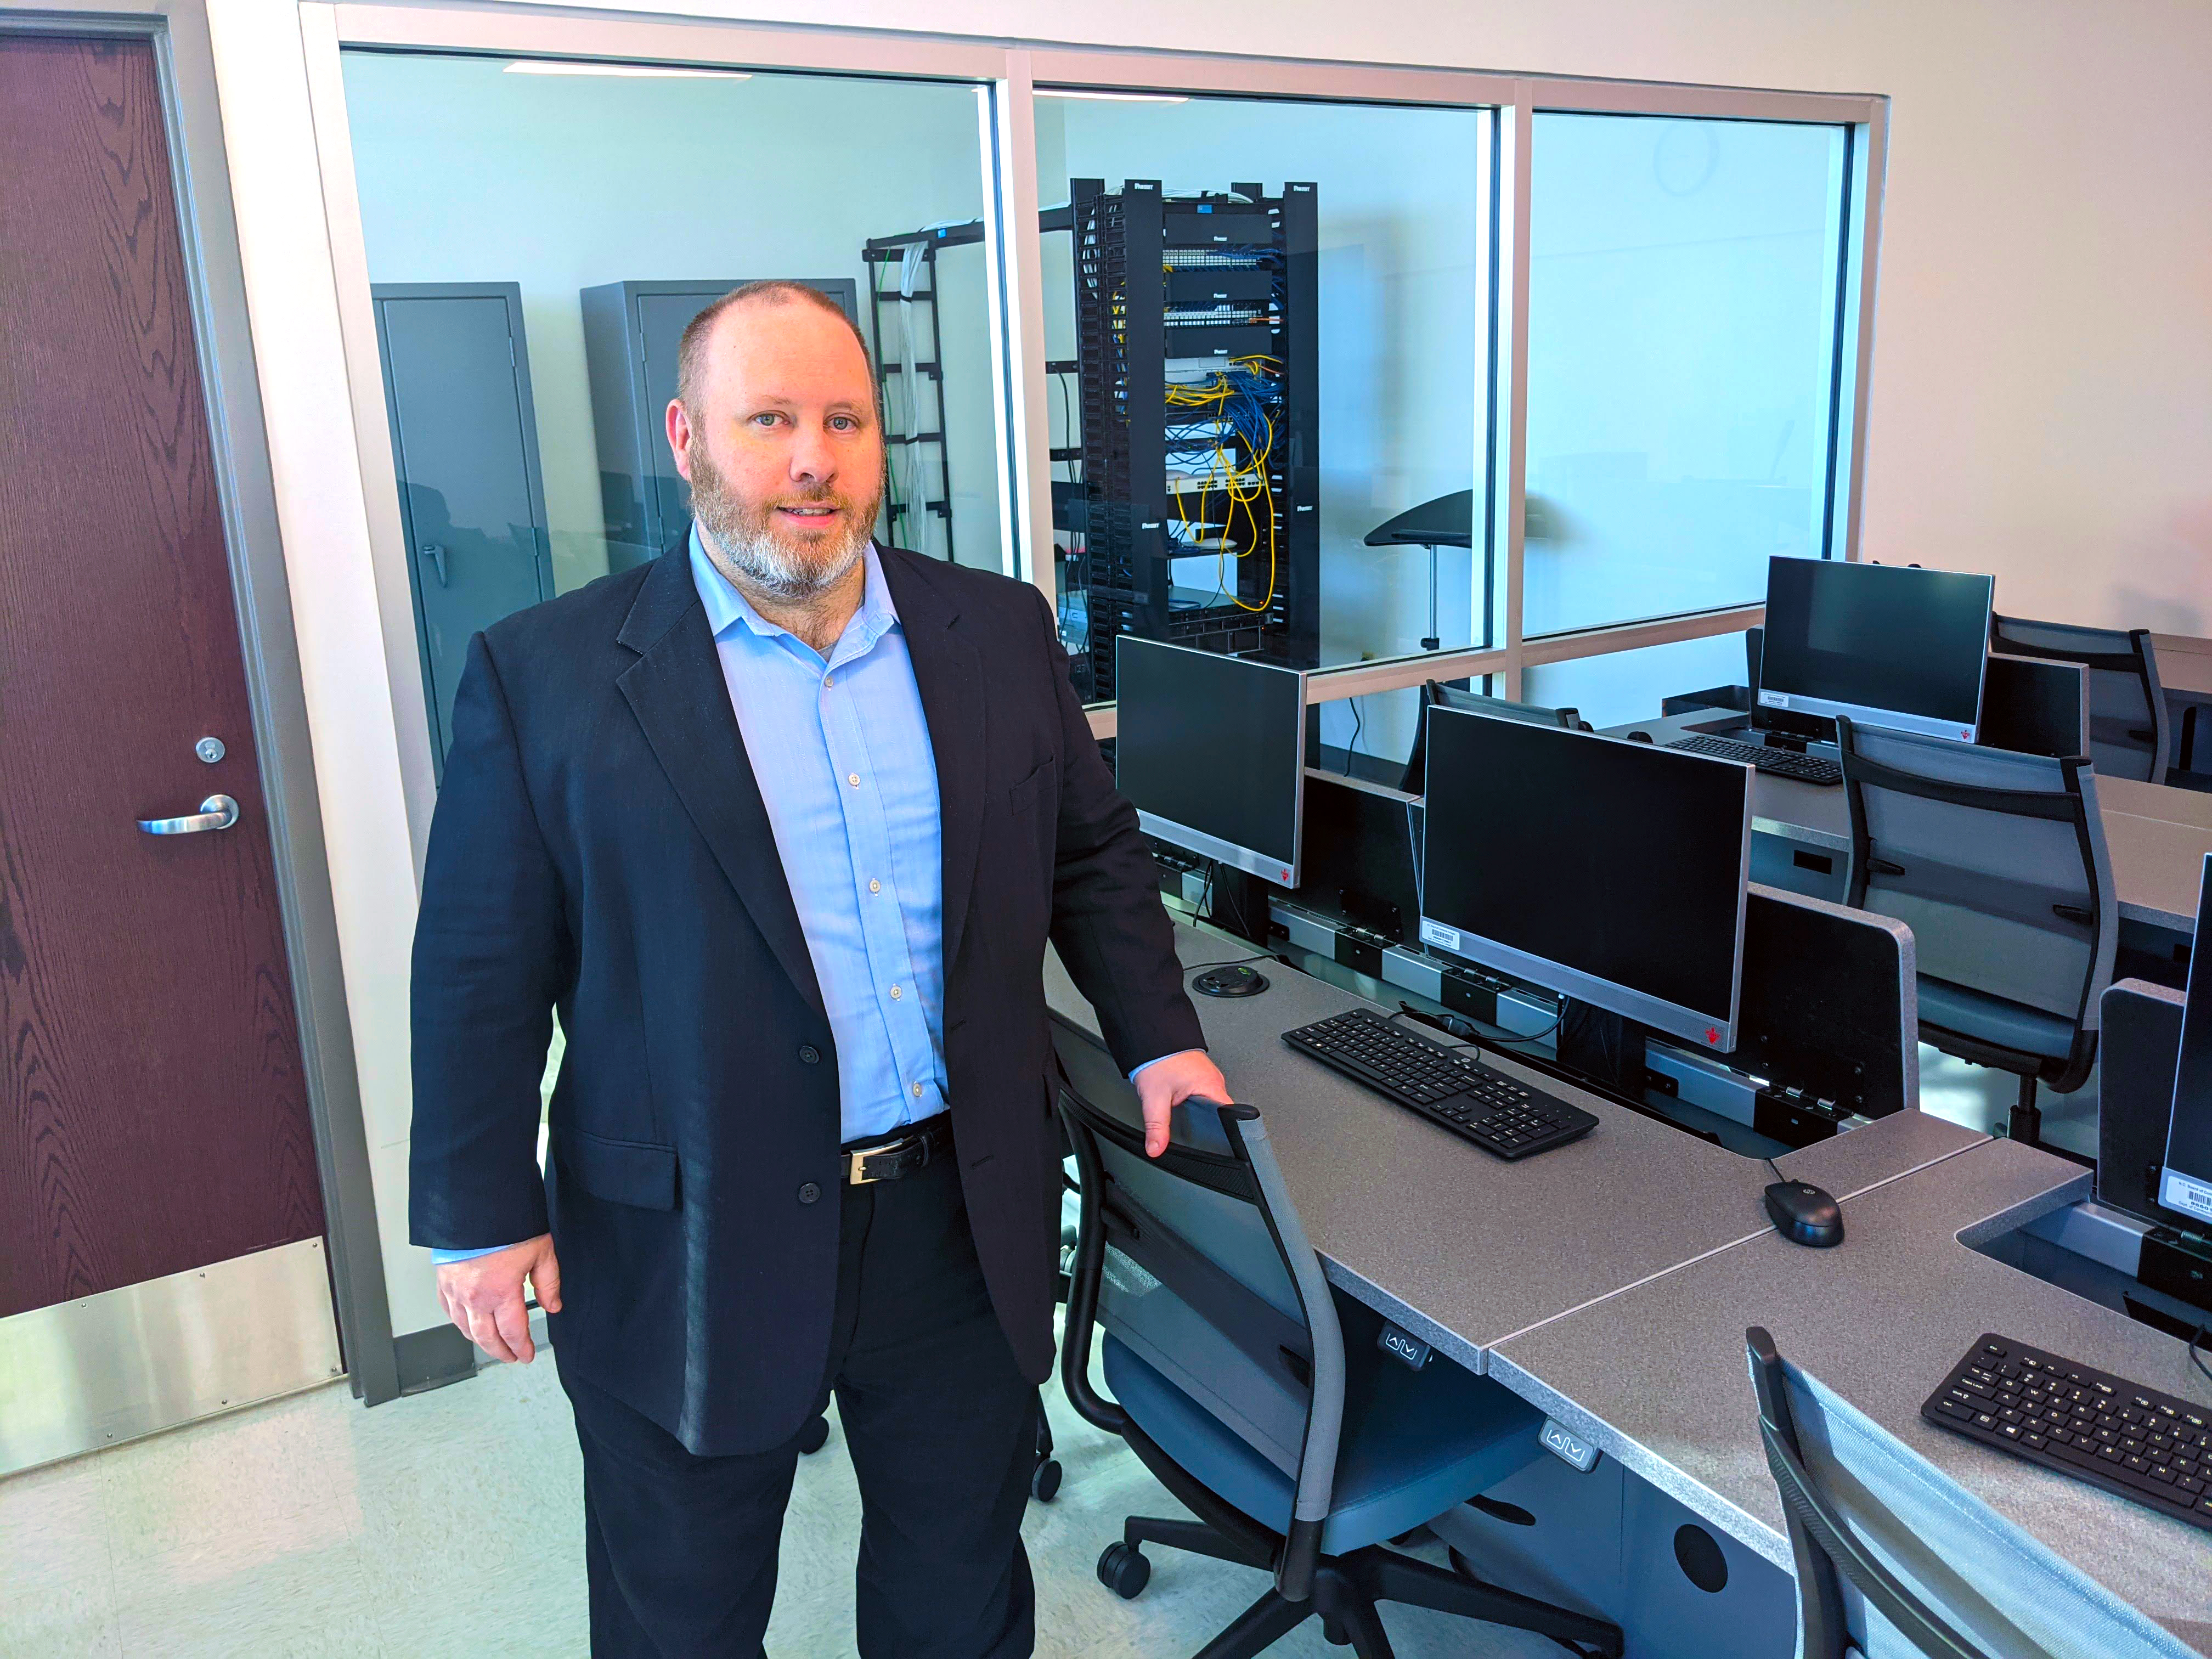 Brian Goodman stands in cyber security classroom